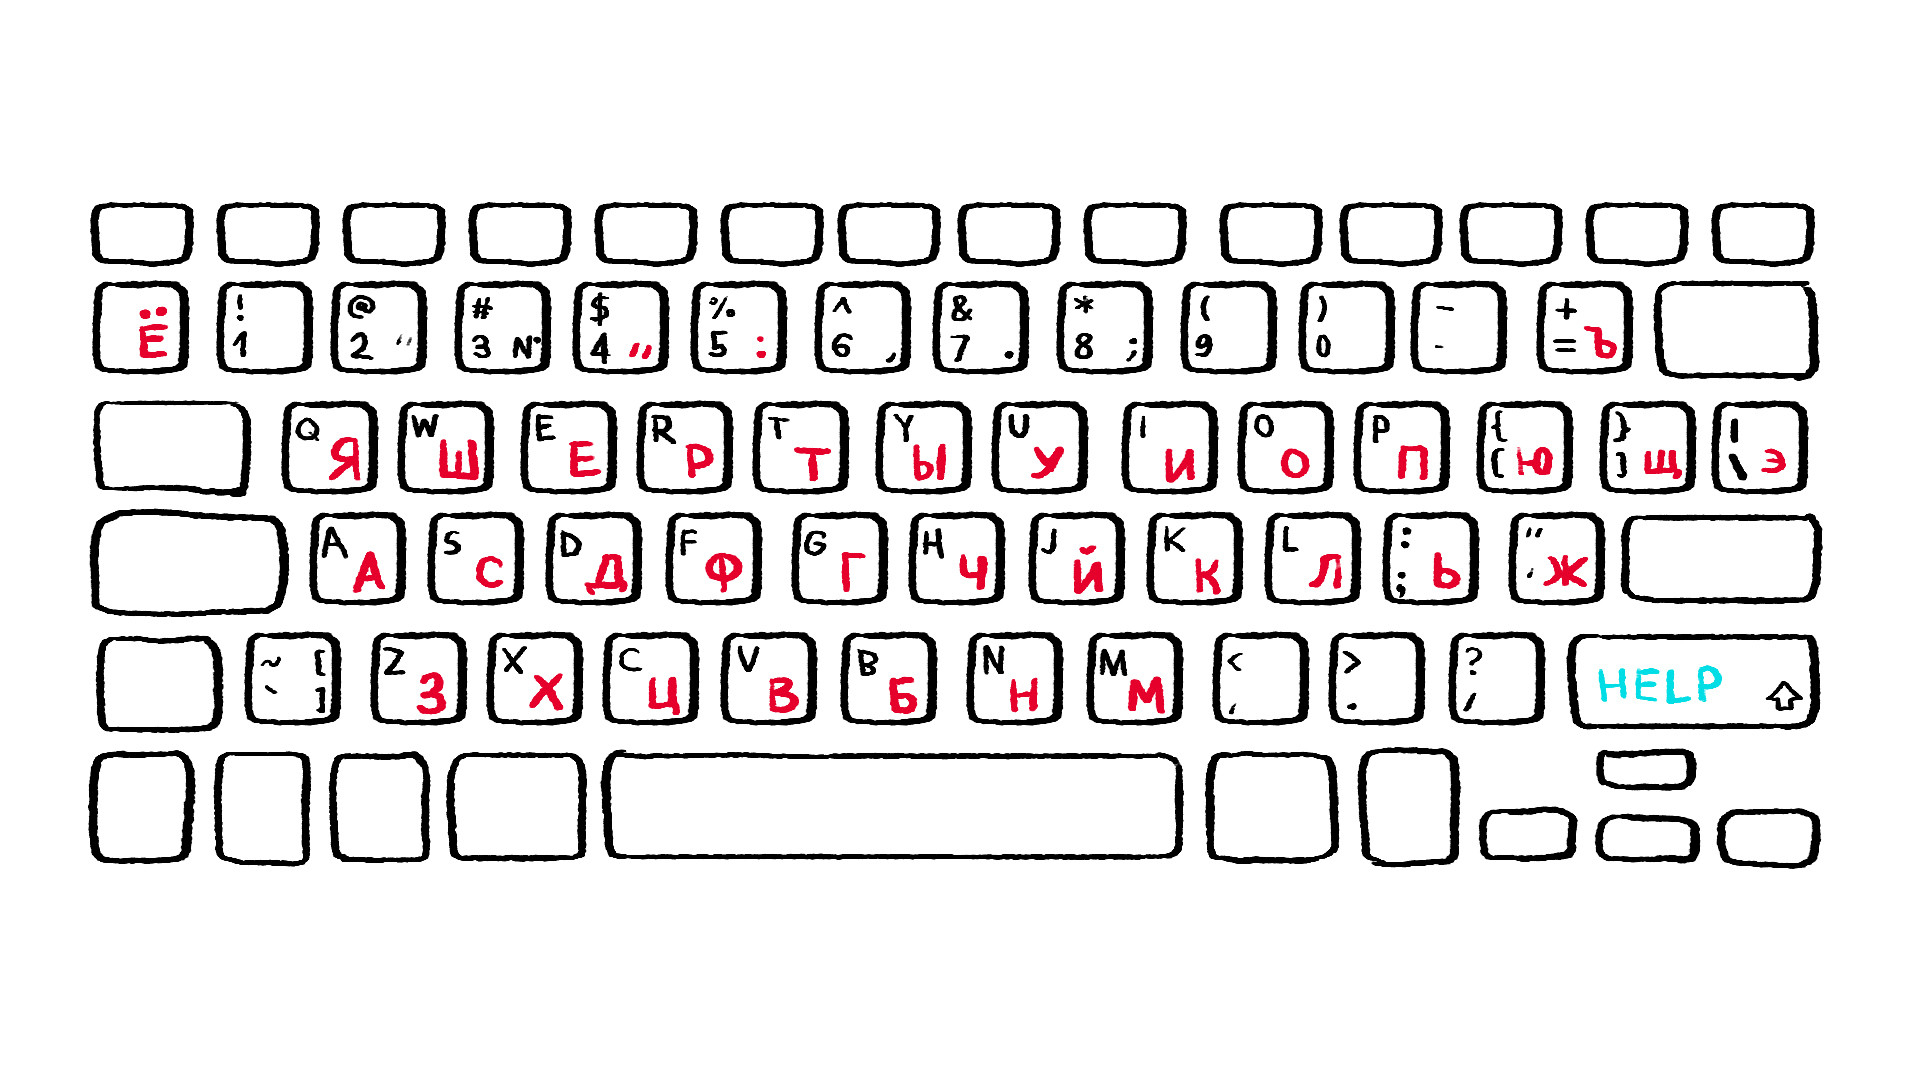 how to type russian with english keyboard